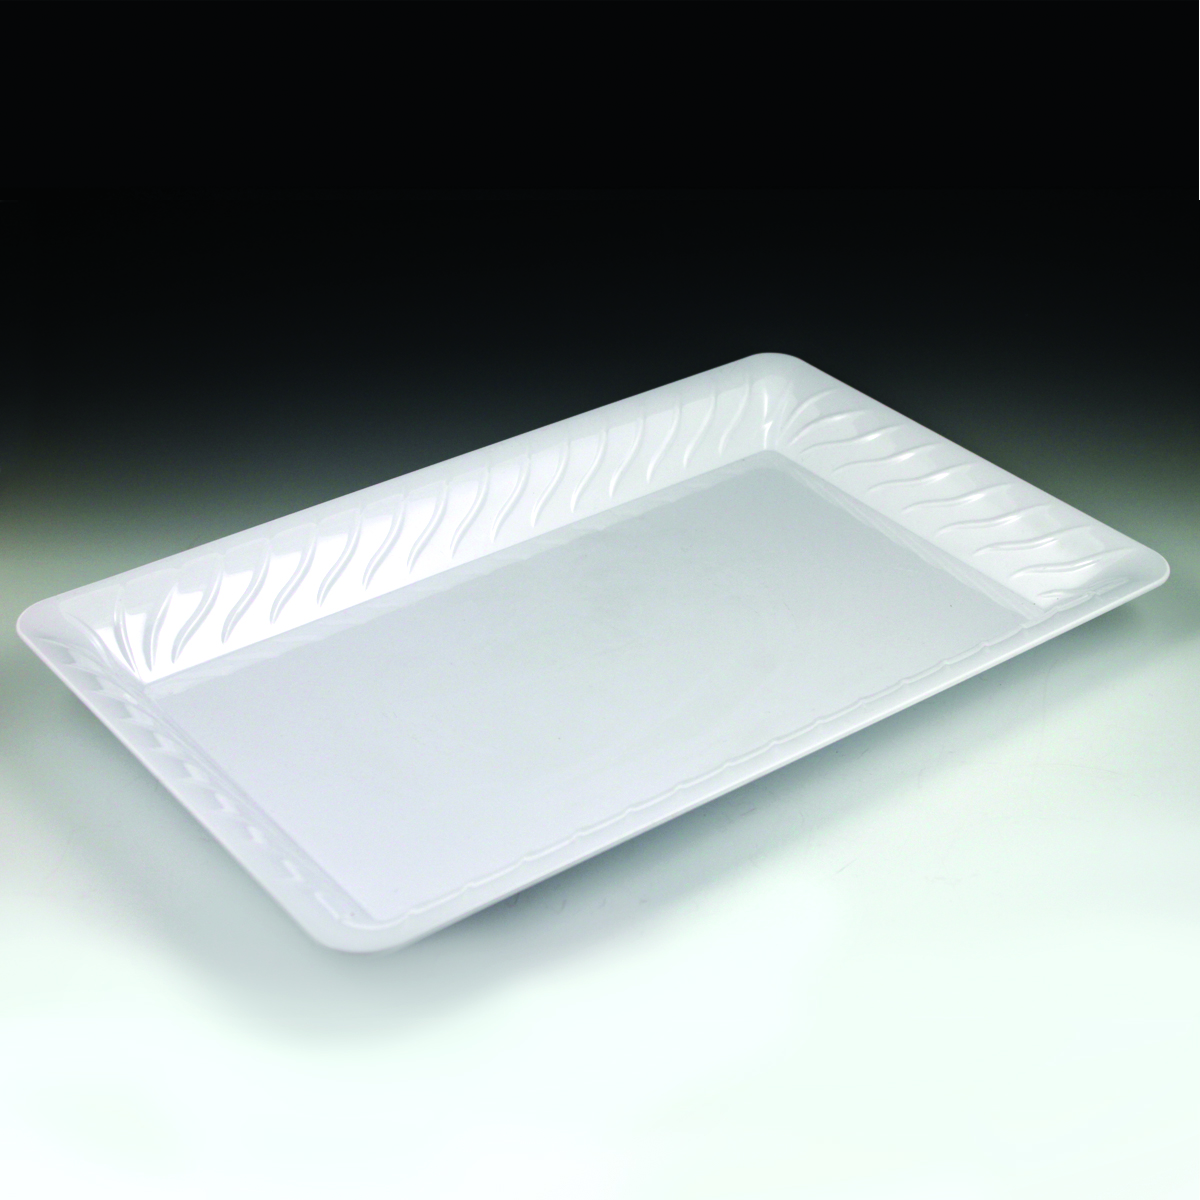 American Metalcraft BL11W Del Mar 11 x 8 Rectangular White Plastic  Stackable Serving Tray / Lid